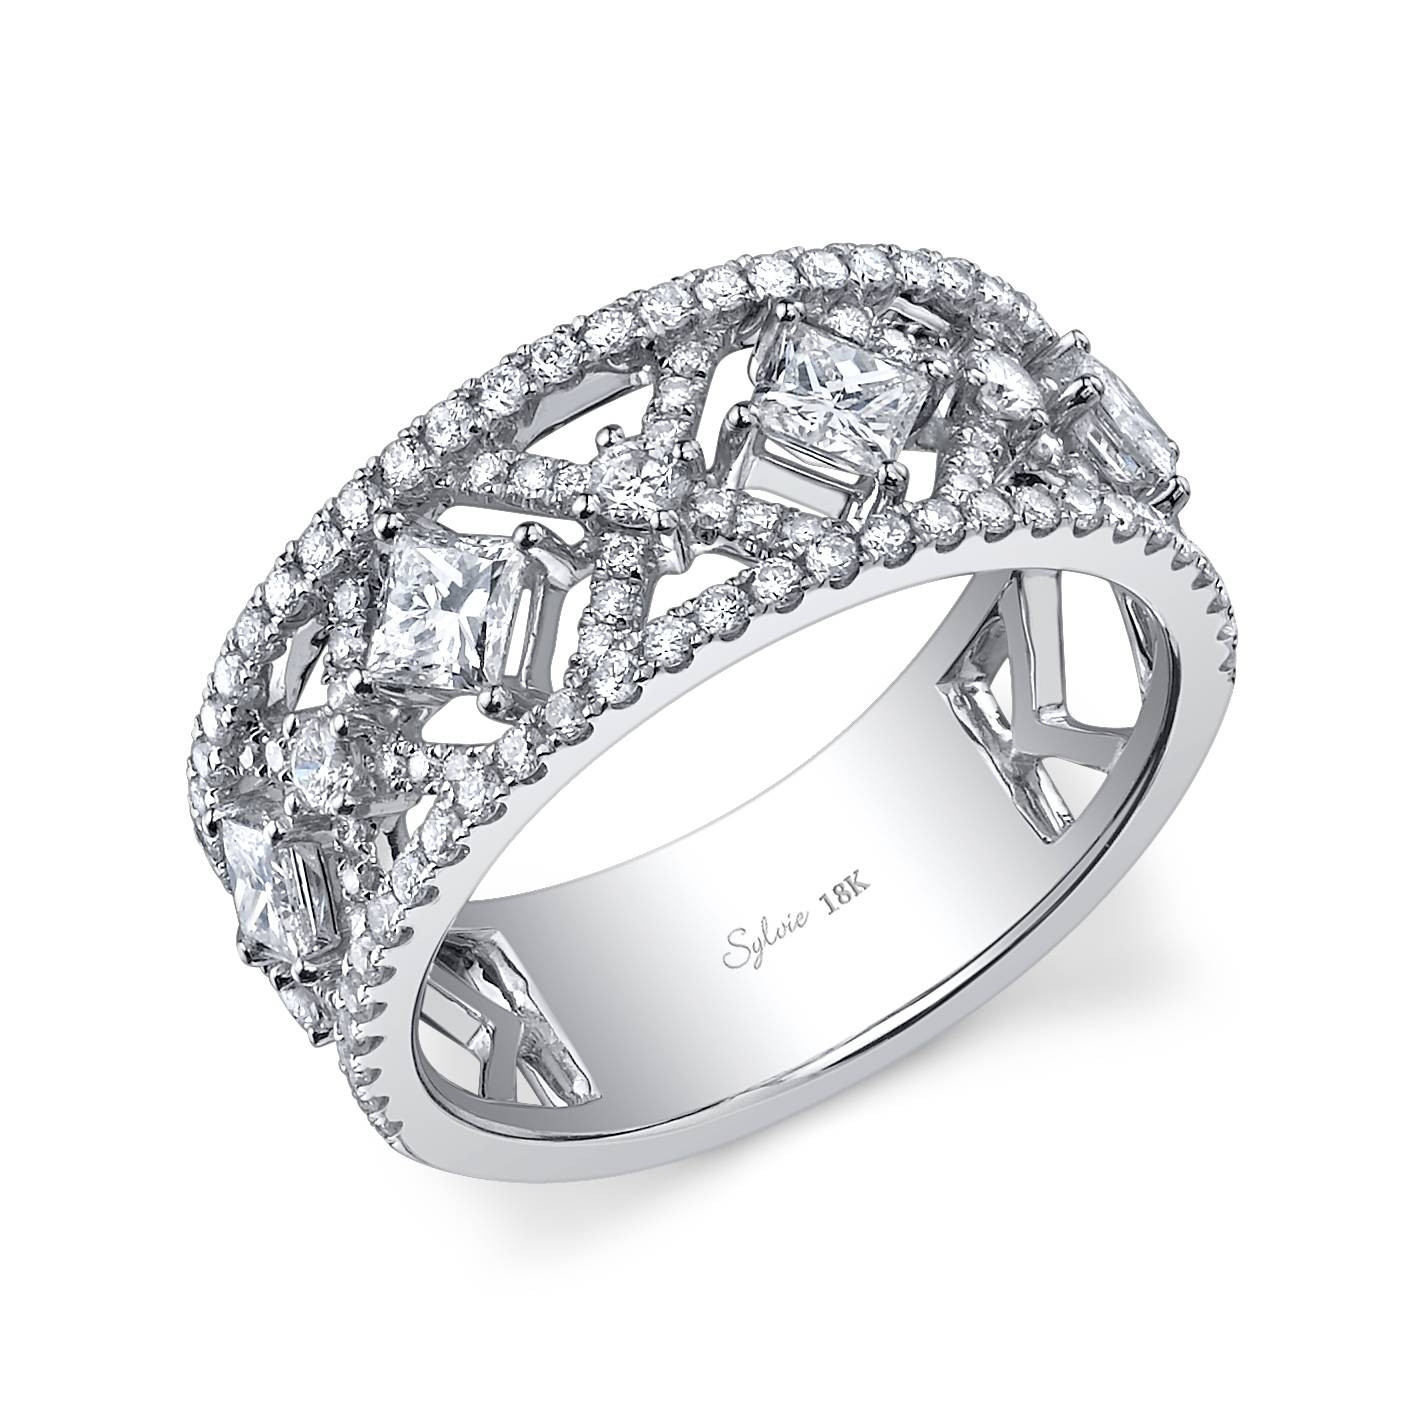 Best Wedding Rings For Women
 15 Best of Unique Wedding Bands For Women